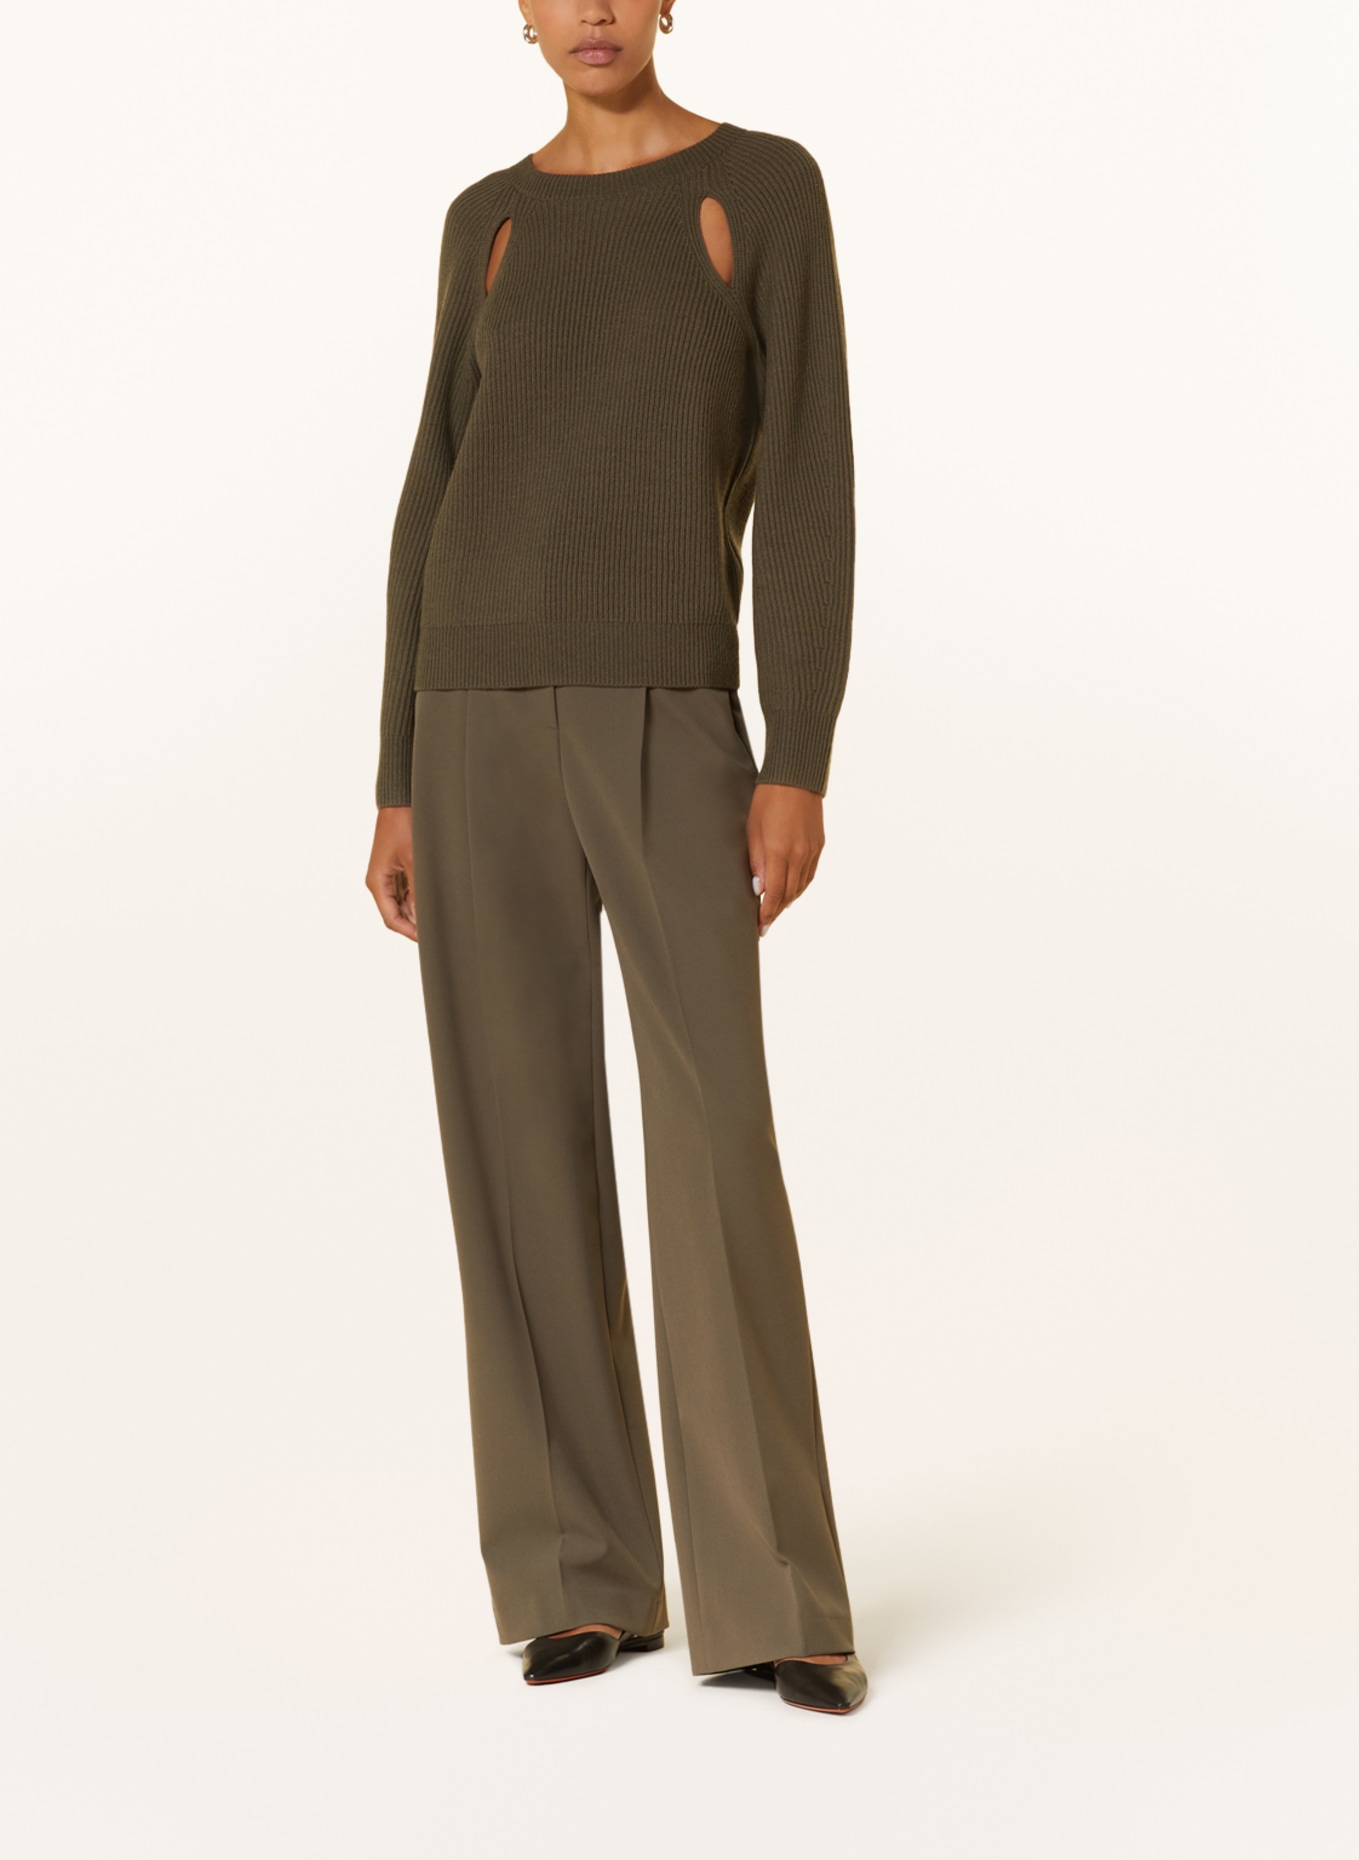 LUISA CERANO Sweater with cut-outs, Color: KHAKI (Image 2)